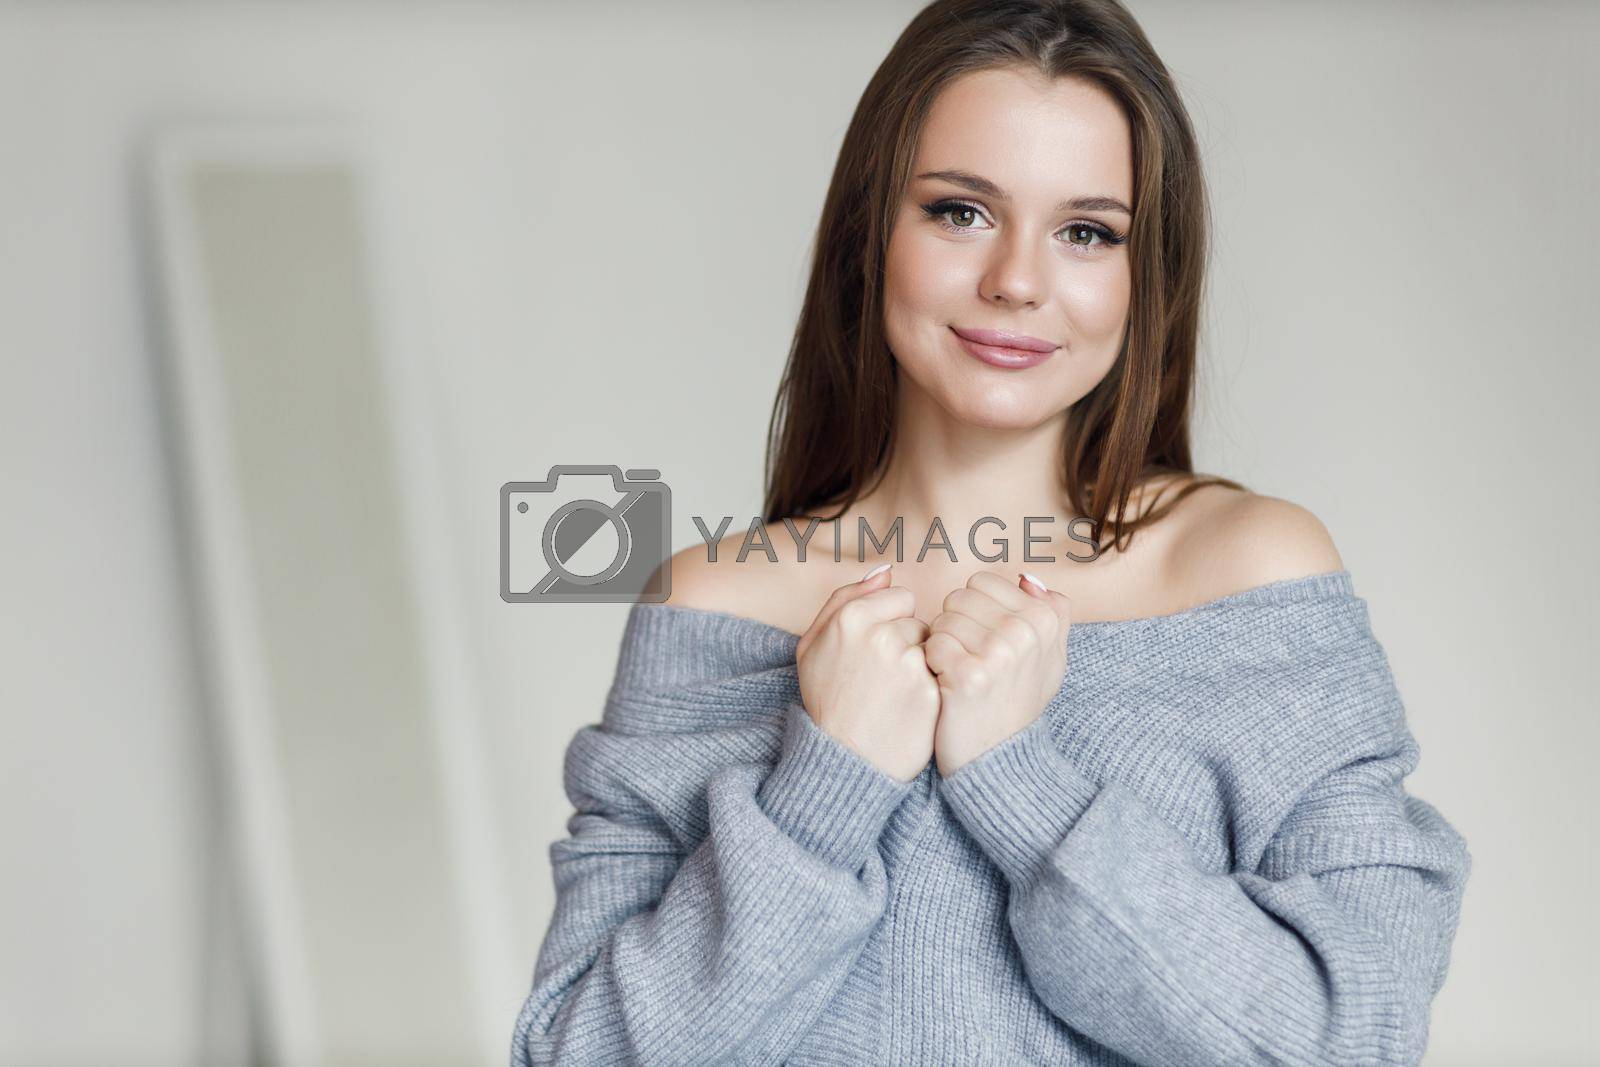 Royalty free image of Young beautiful cozy woman indoor by splash